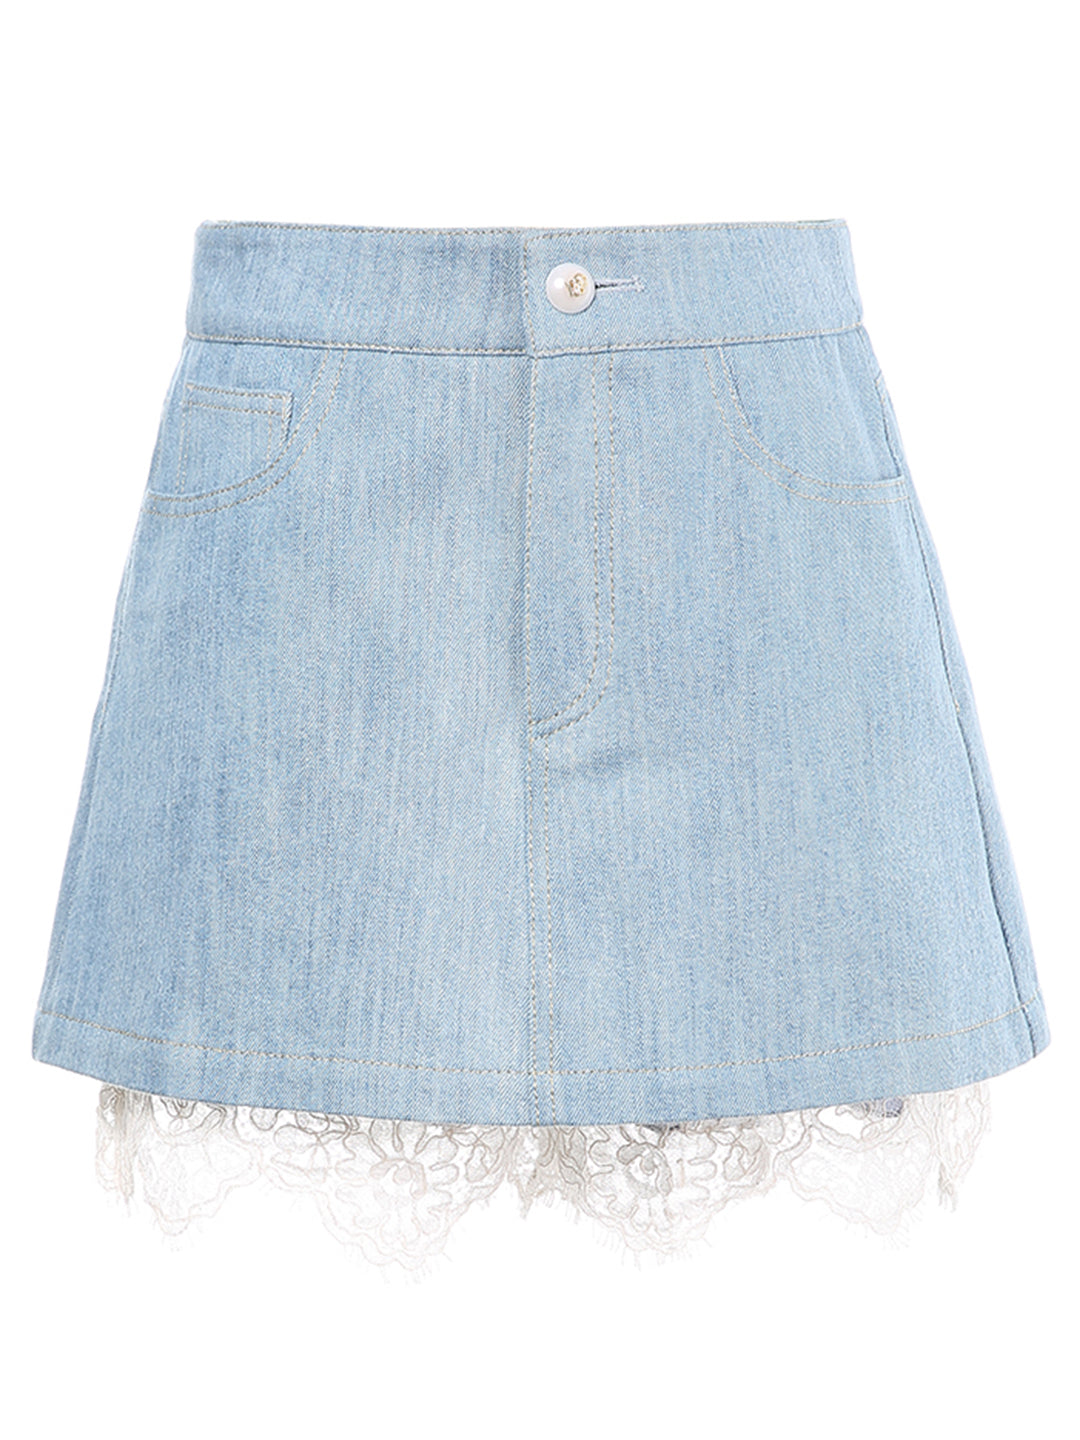 Button Down Jeans Skirt